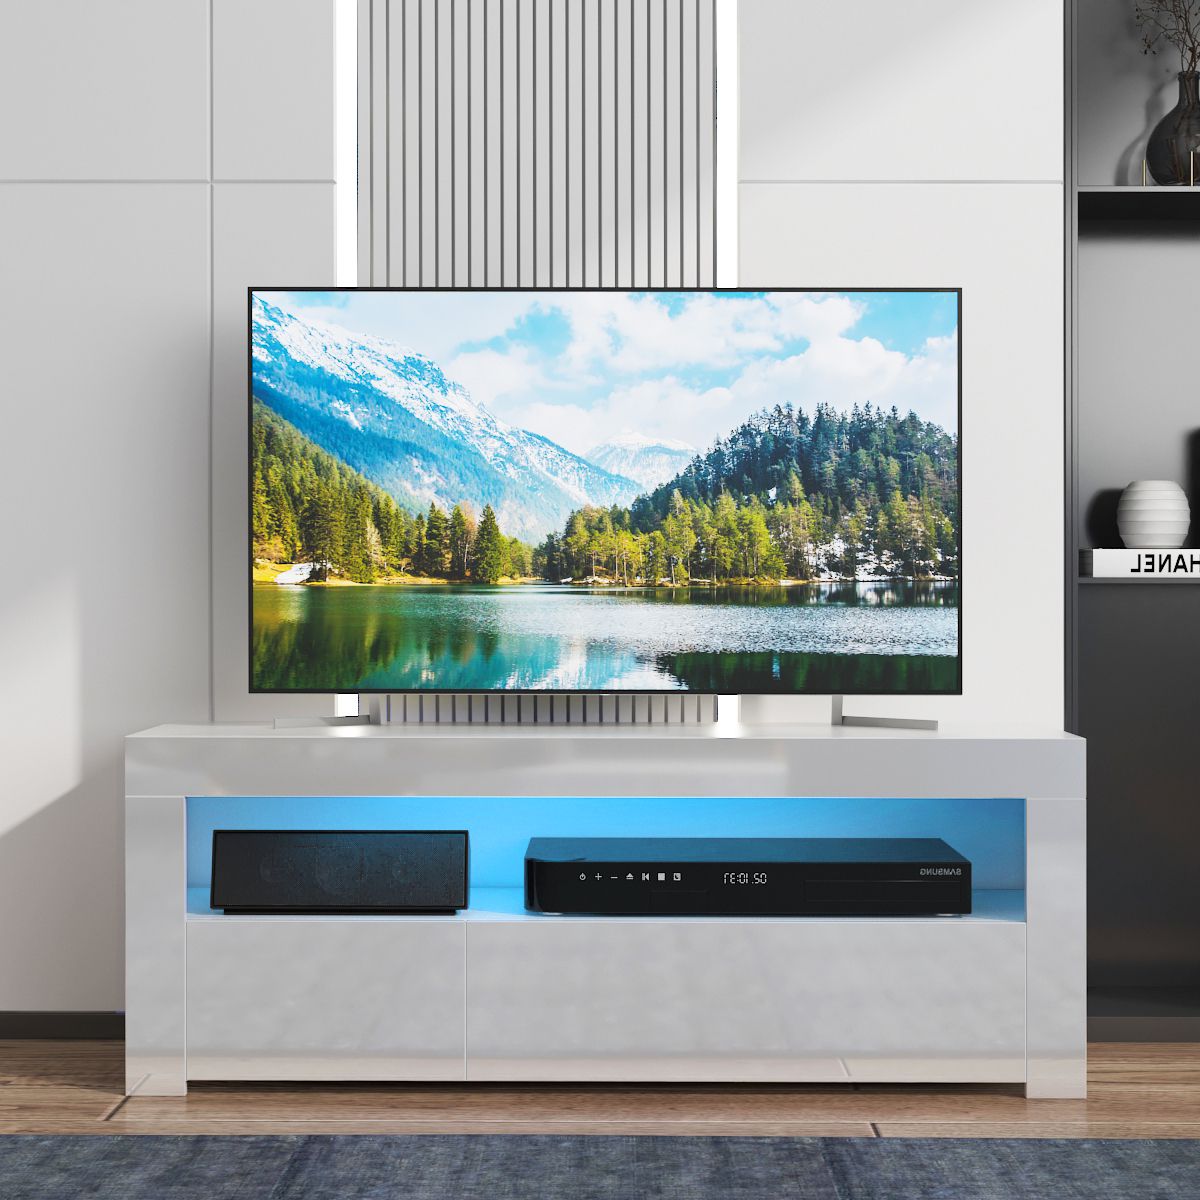 High Gloss Tv Stand For Tvs Up To 55'', With 16 Color Led Within Ktaxon Modern High Gloss Tv Stands With Led Drawer And Shelves (Gallery 20 of 20)